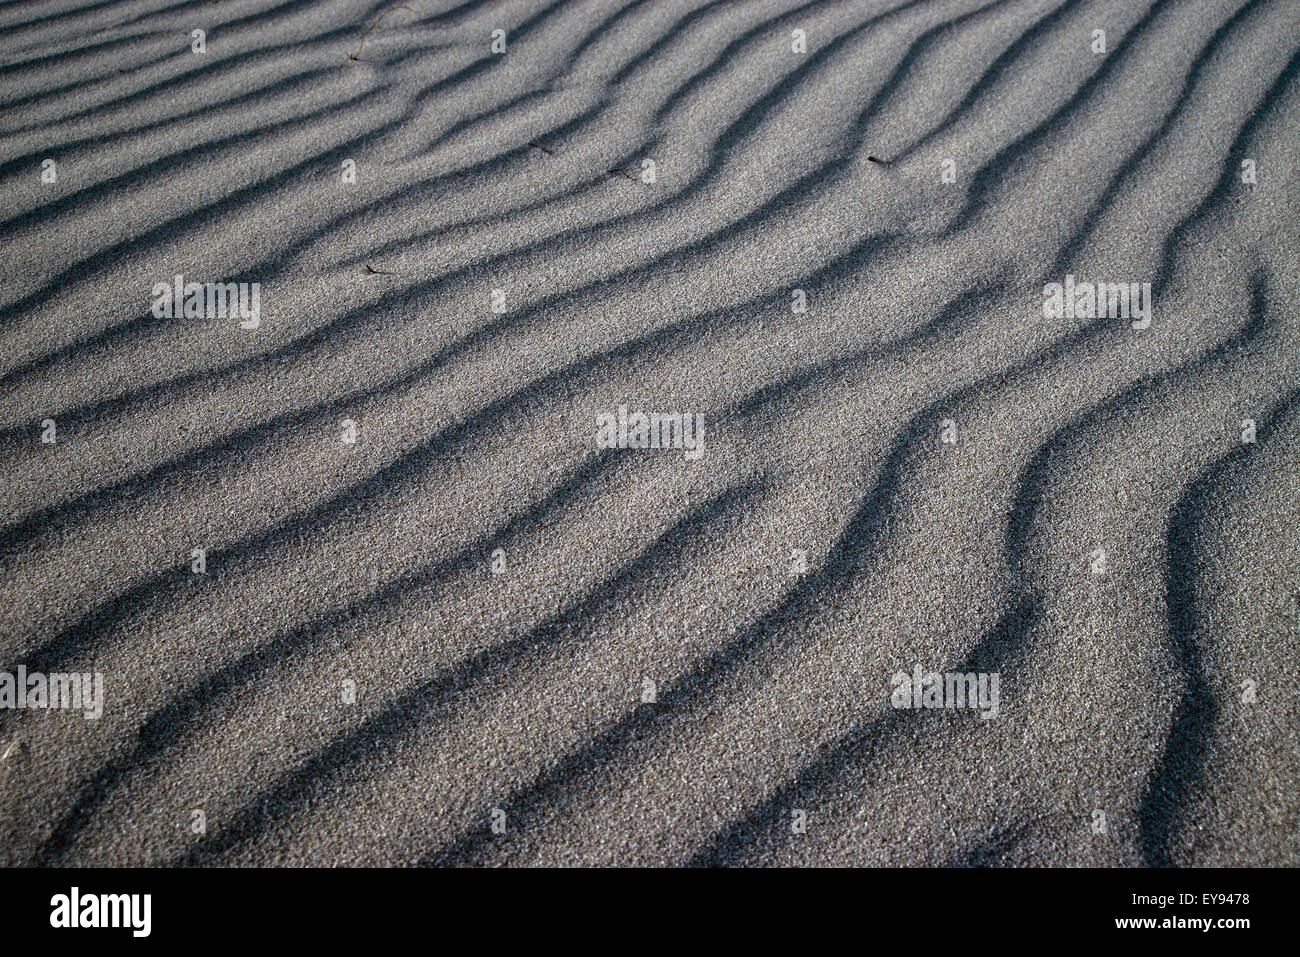 Wave line texture in sand on beach Stock Photo